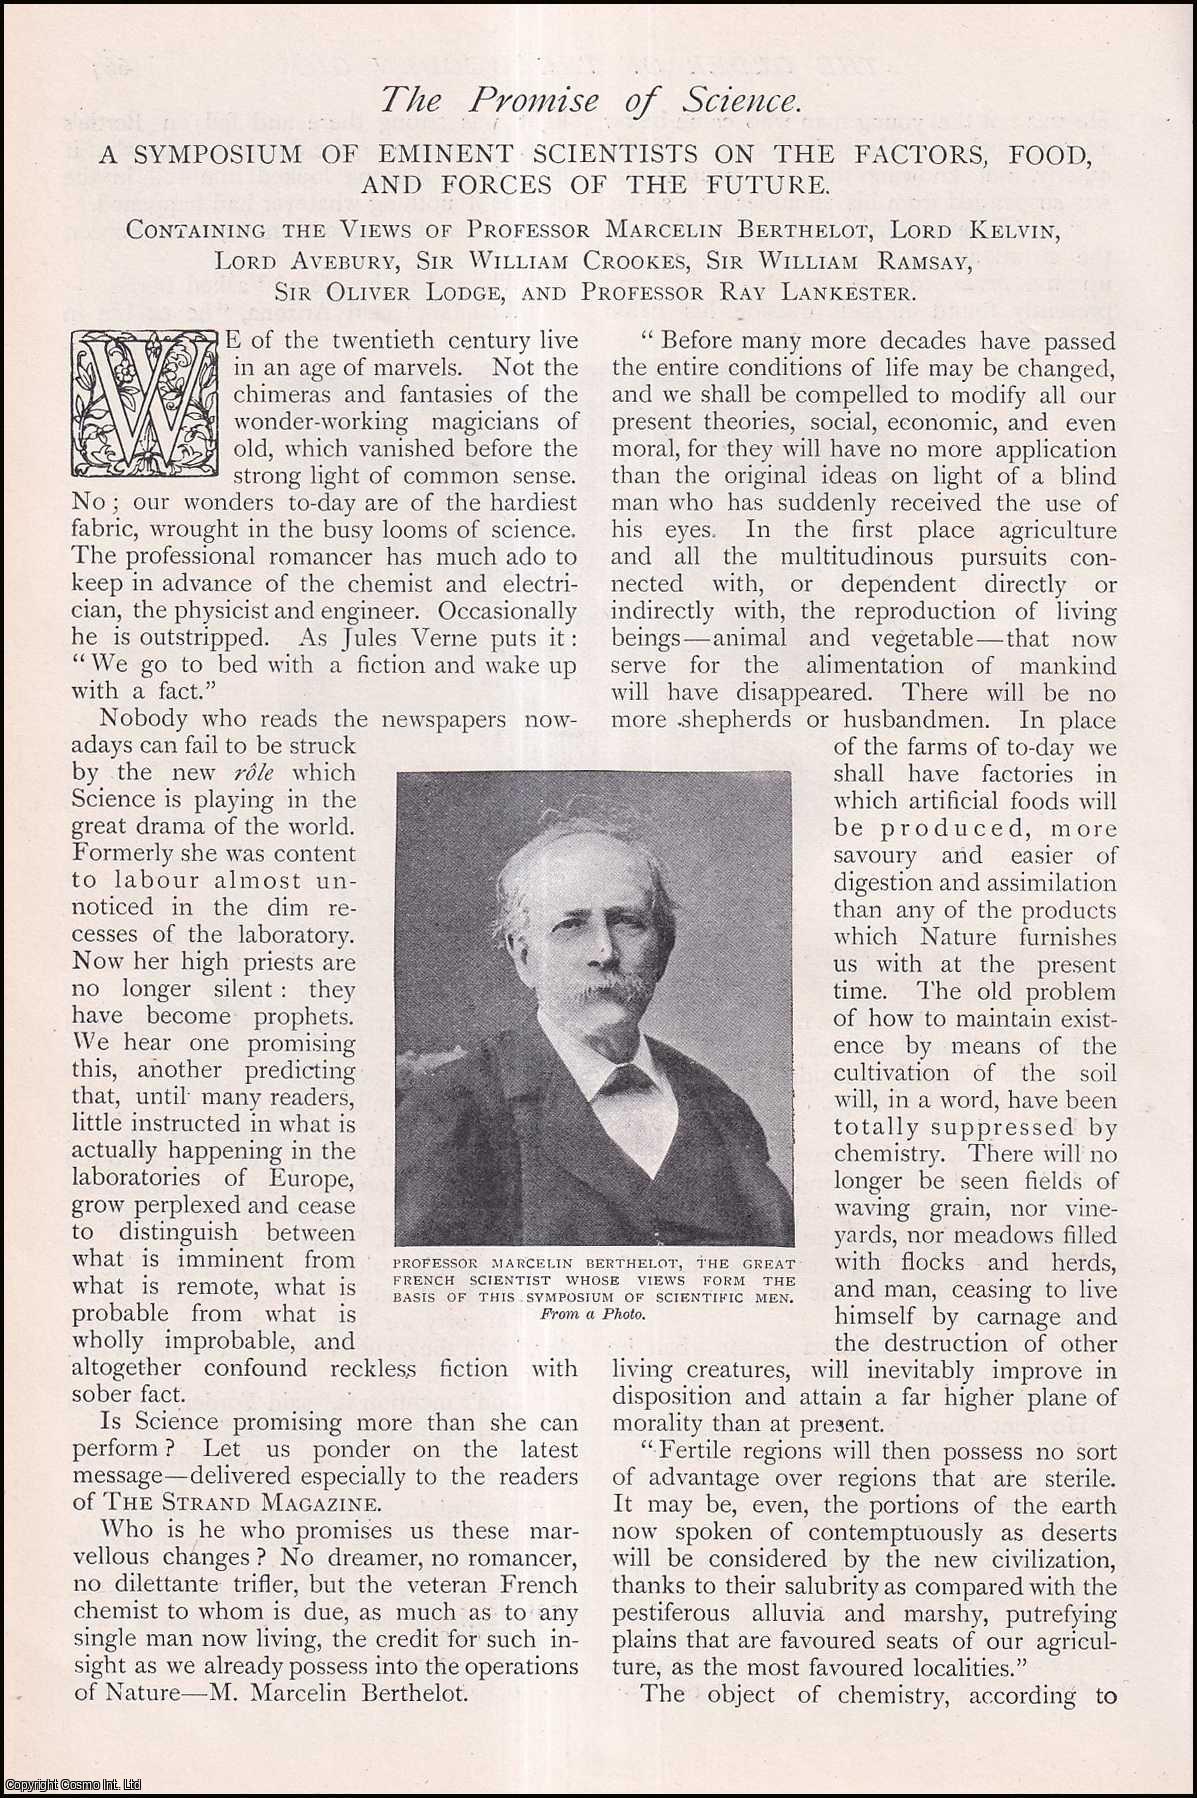 --- - The Promise of Science. Views of Eminent Scientists on the factors, food, and forces of the future: Berthelot, Kelvin, Avebury, Crookes, Ramsay, Lodge, Lankester. A rare original article from The Strand Magazine, 1904.